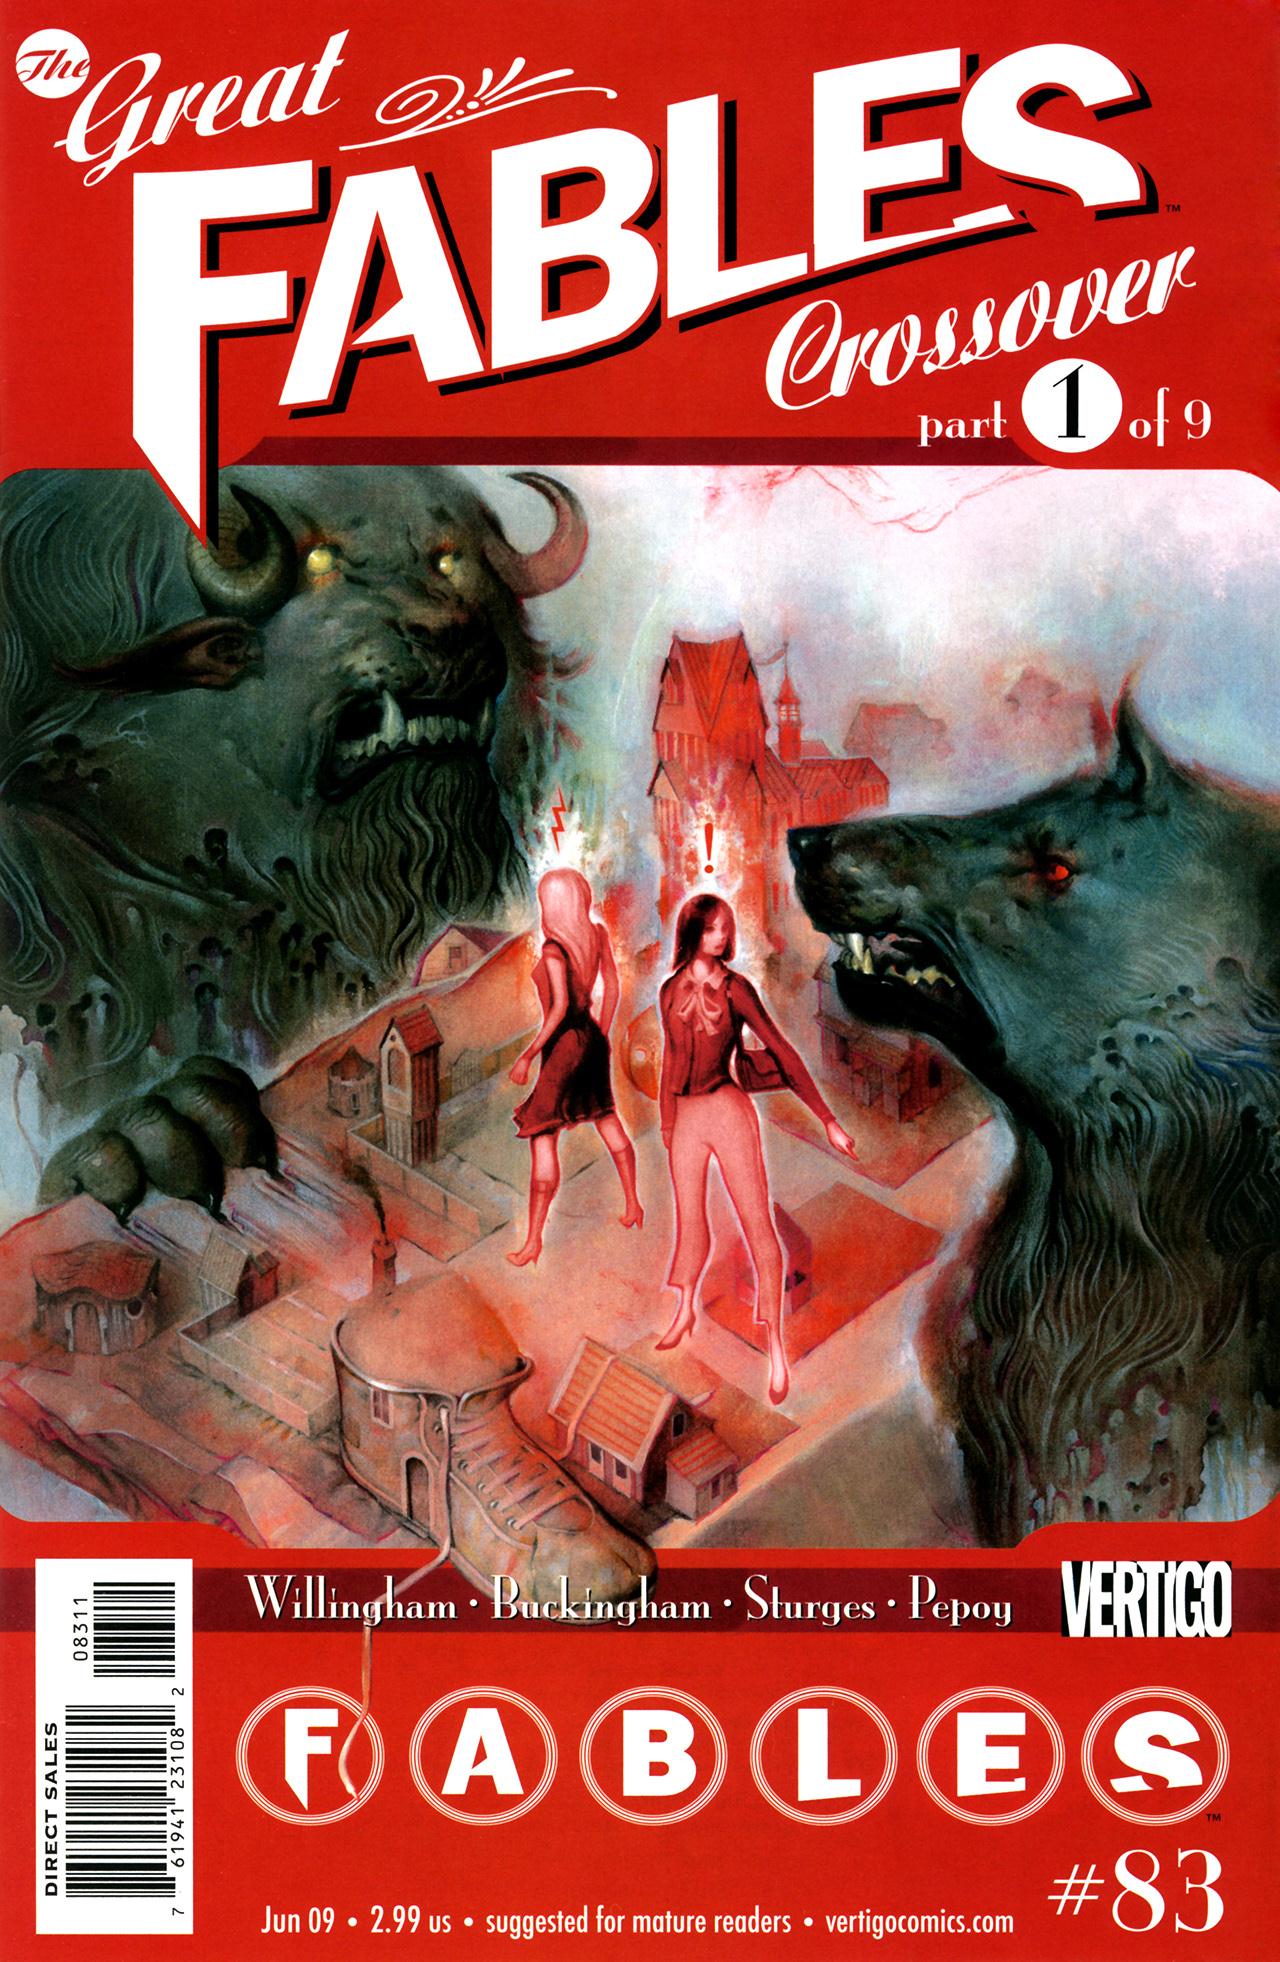 The Great Fables Crossover